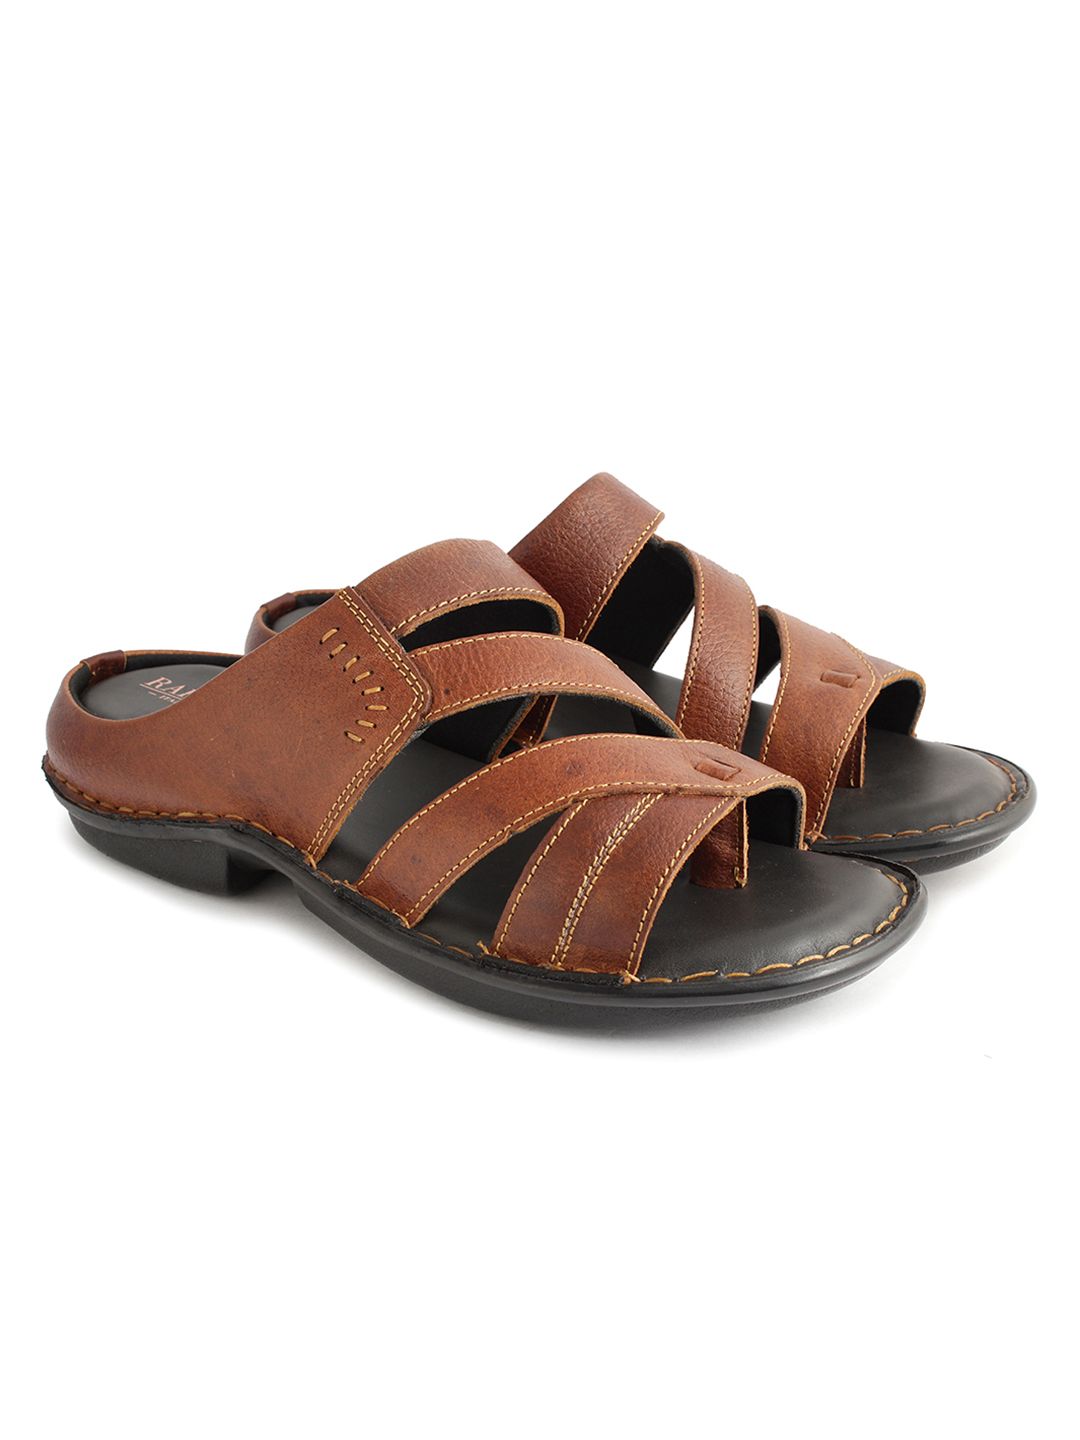 Franco Leone Men's Black Leather Sandals and Floaters - 7 UK/India (41 EU)  : Amazon.in: Fashion